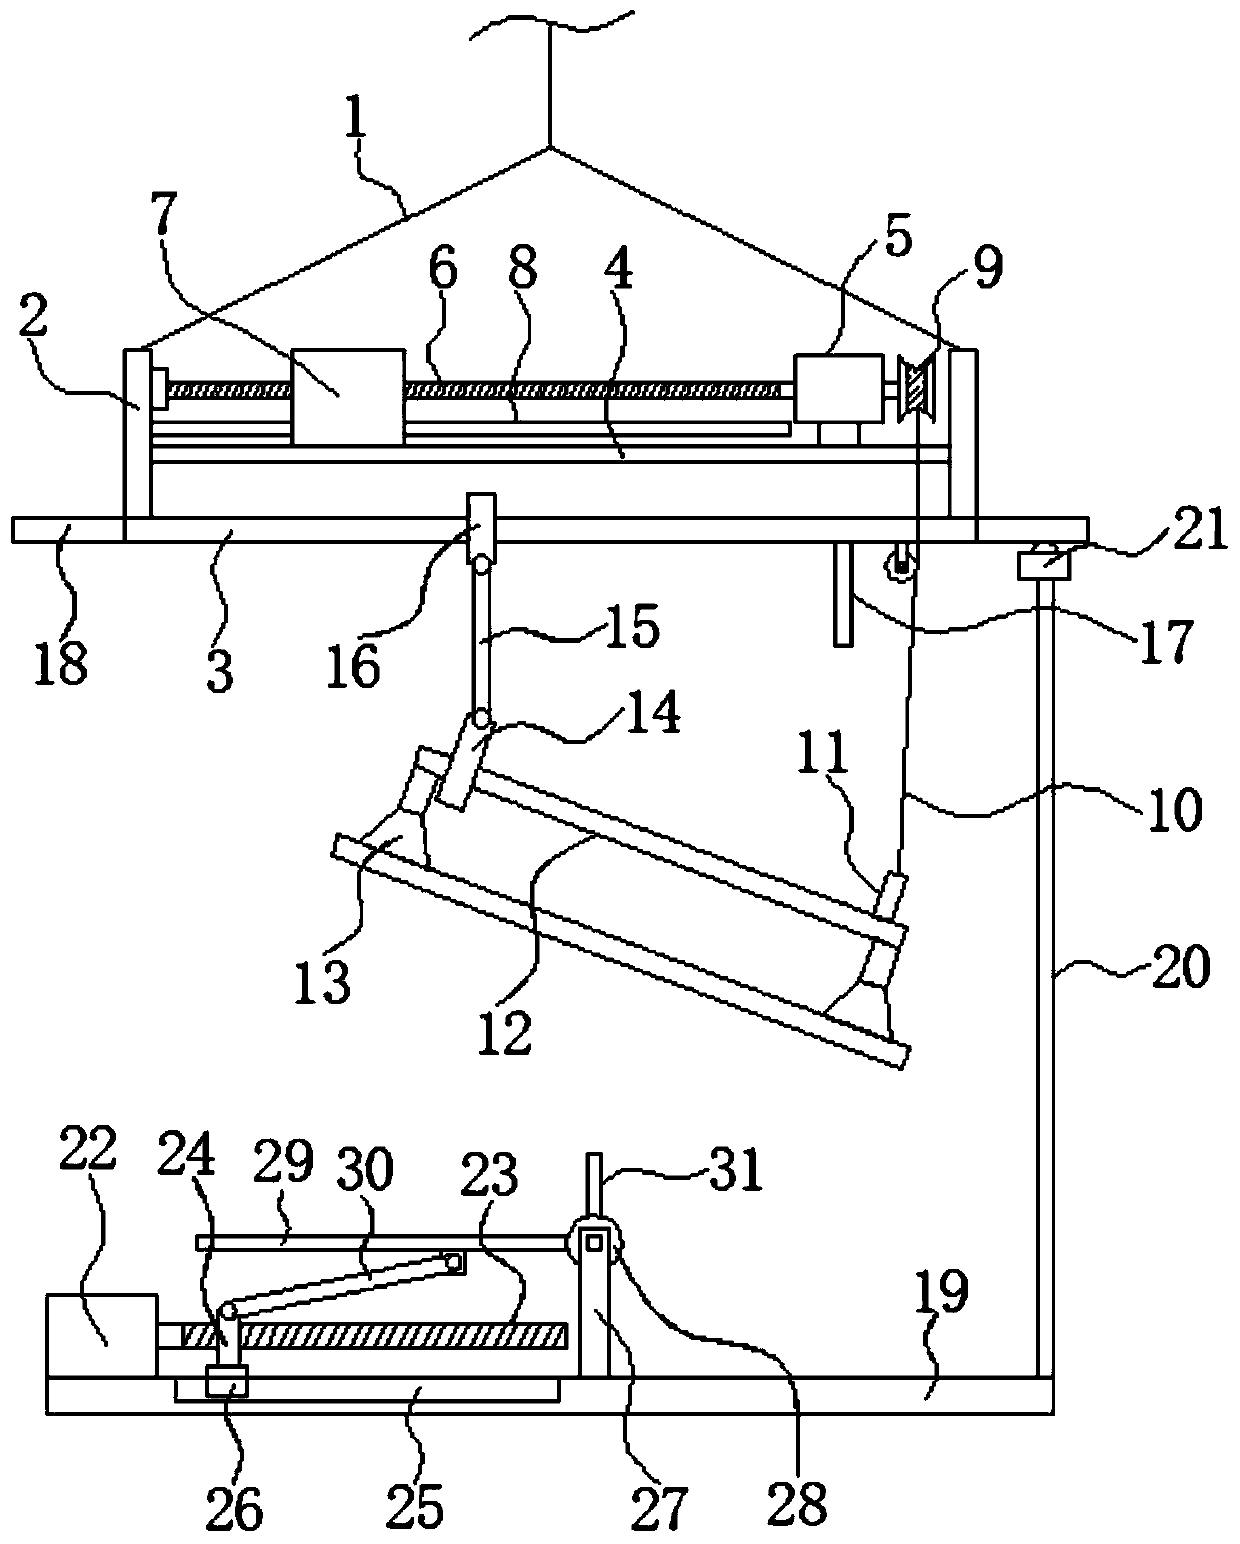 Hoisting device for mounting solar photovoltaic panel